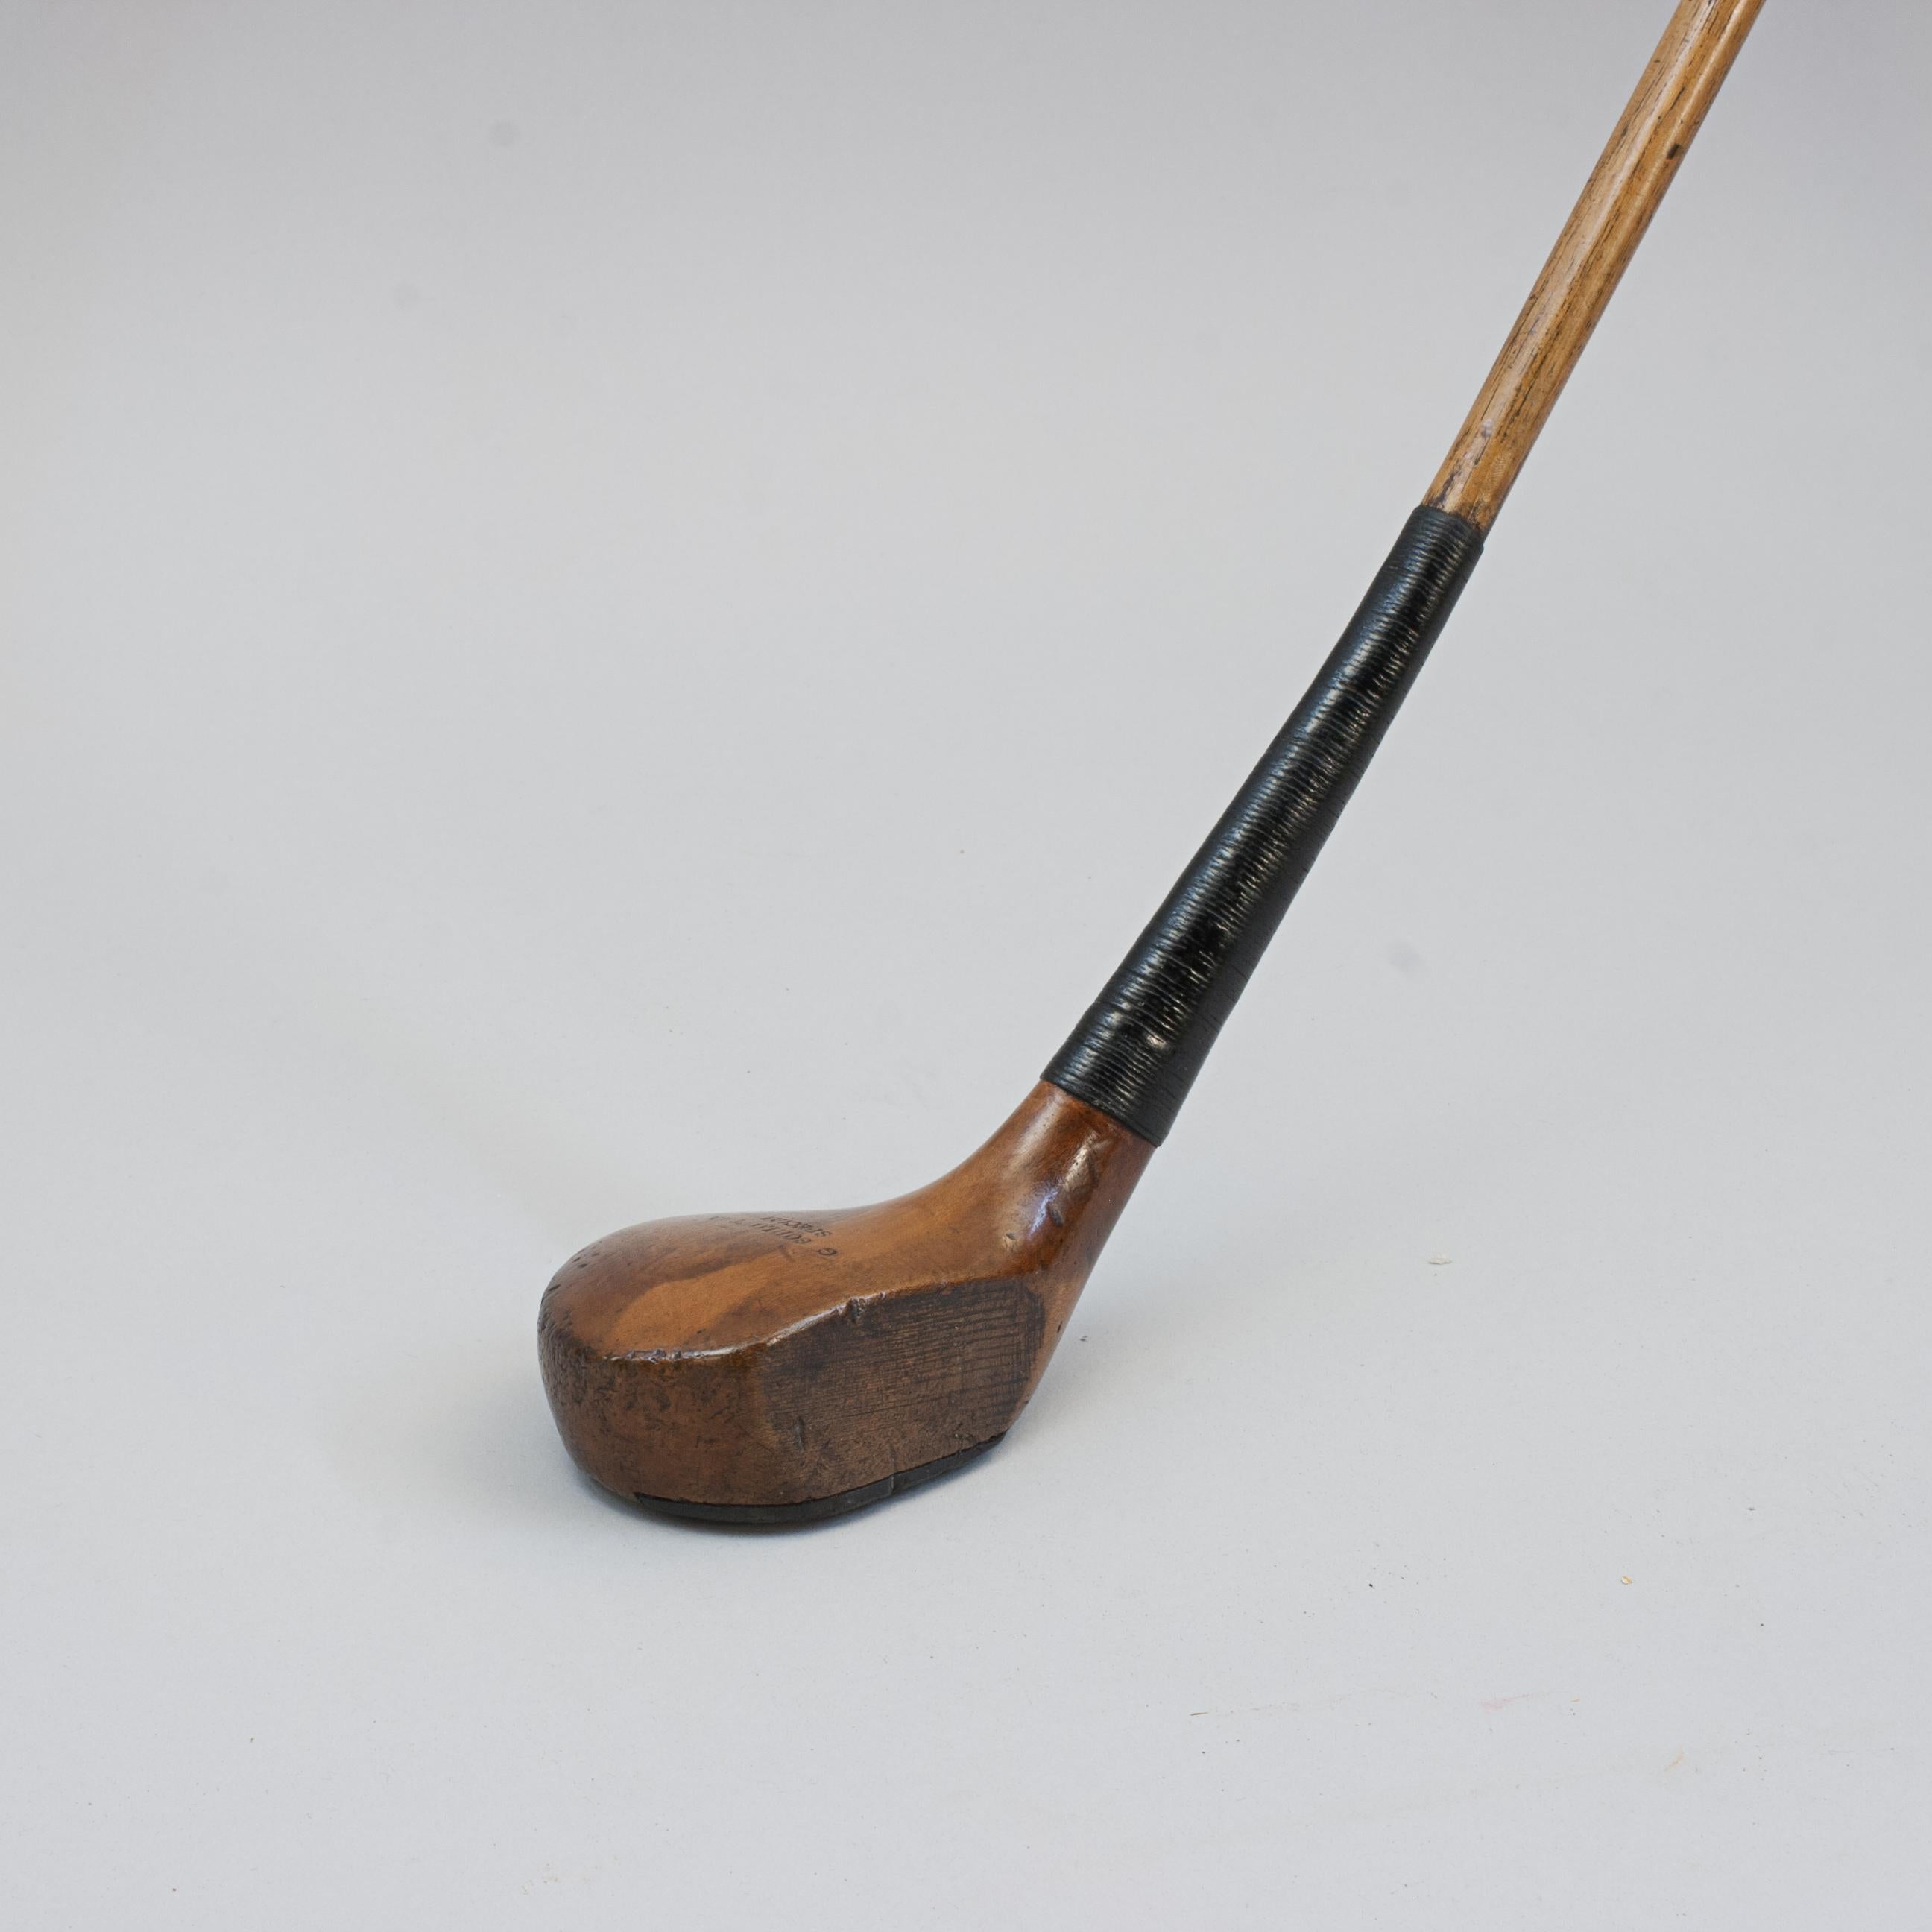 Antique Scared Head Bulger Style Driver.
An elegant scared head persimmon wood driver by Schlottman. This great looking club has a polished club head, lead weight to the rear and the traditional insert along the leading edge of the sole, head is